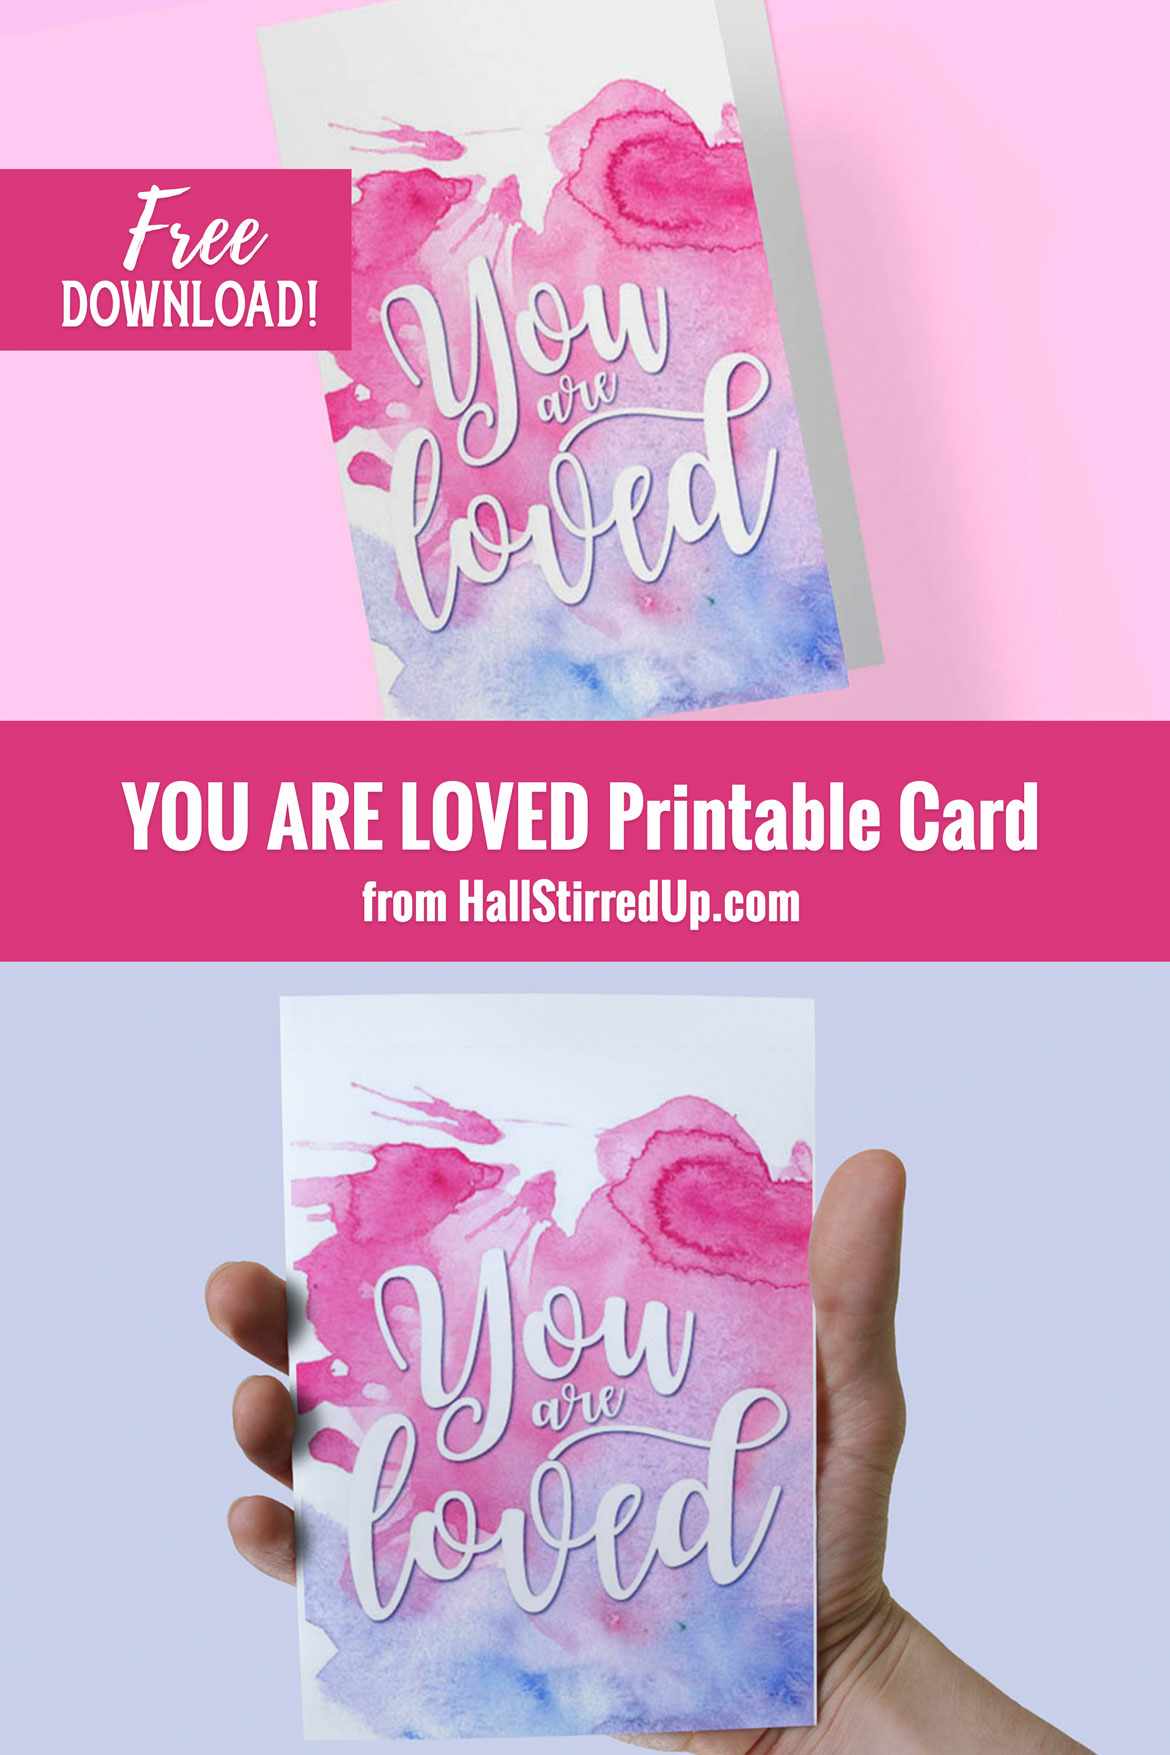 You are loved Download your free printable card